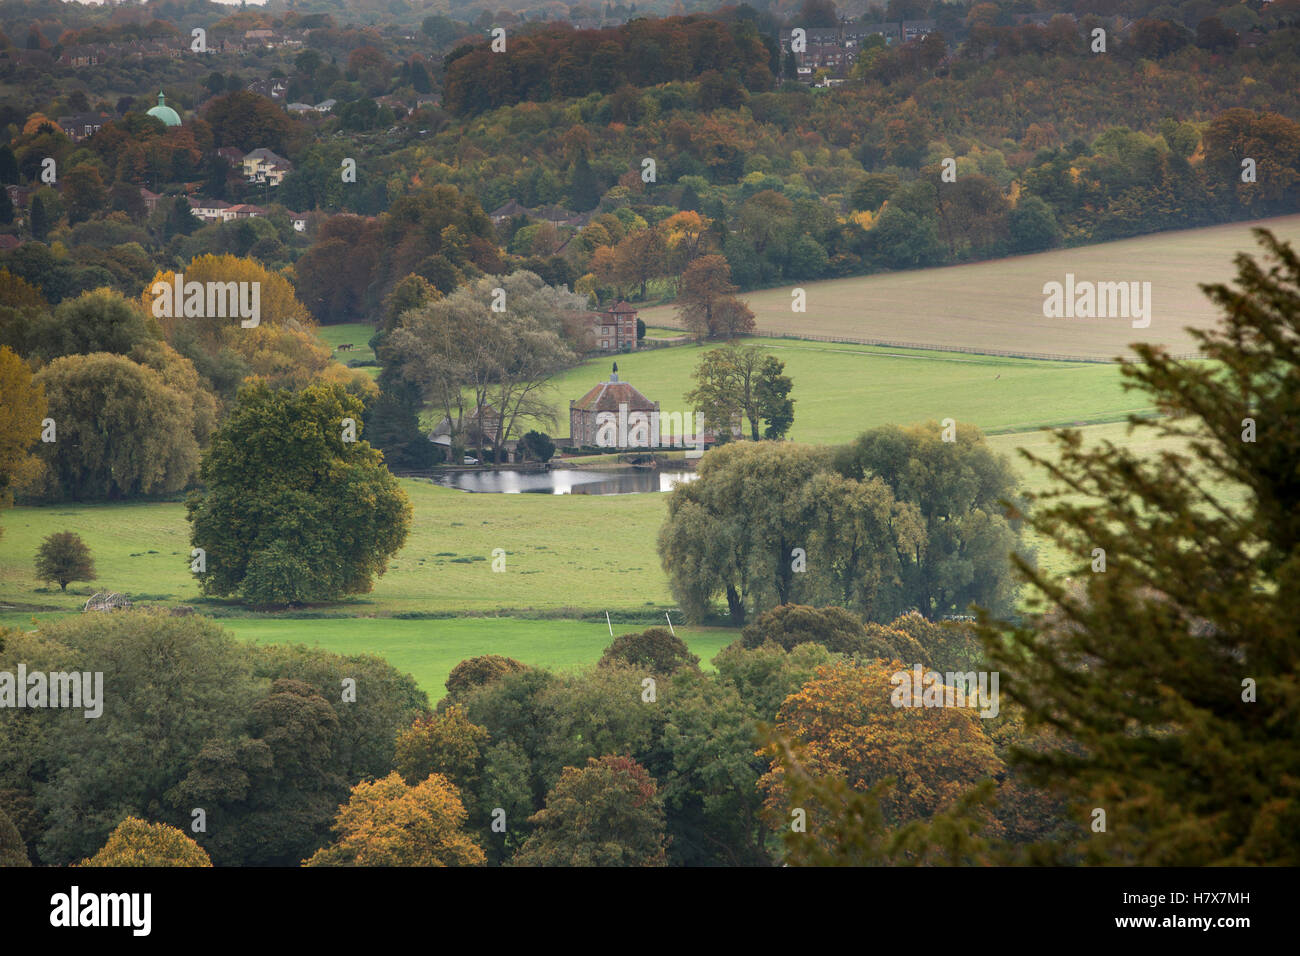 England, Buckinghamshire, West Wycombe, elevated view of Park and William Penn statue on Sawmill House Stock Photo